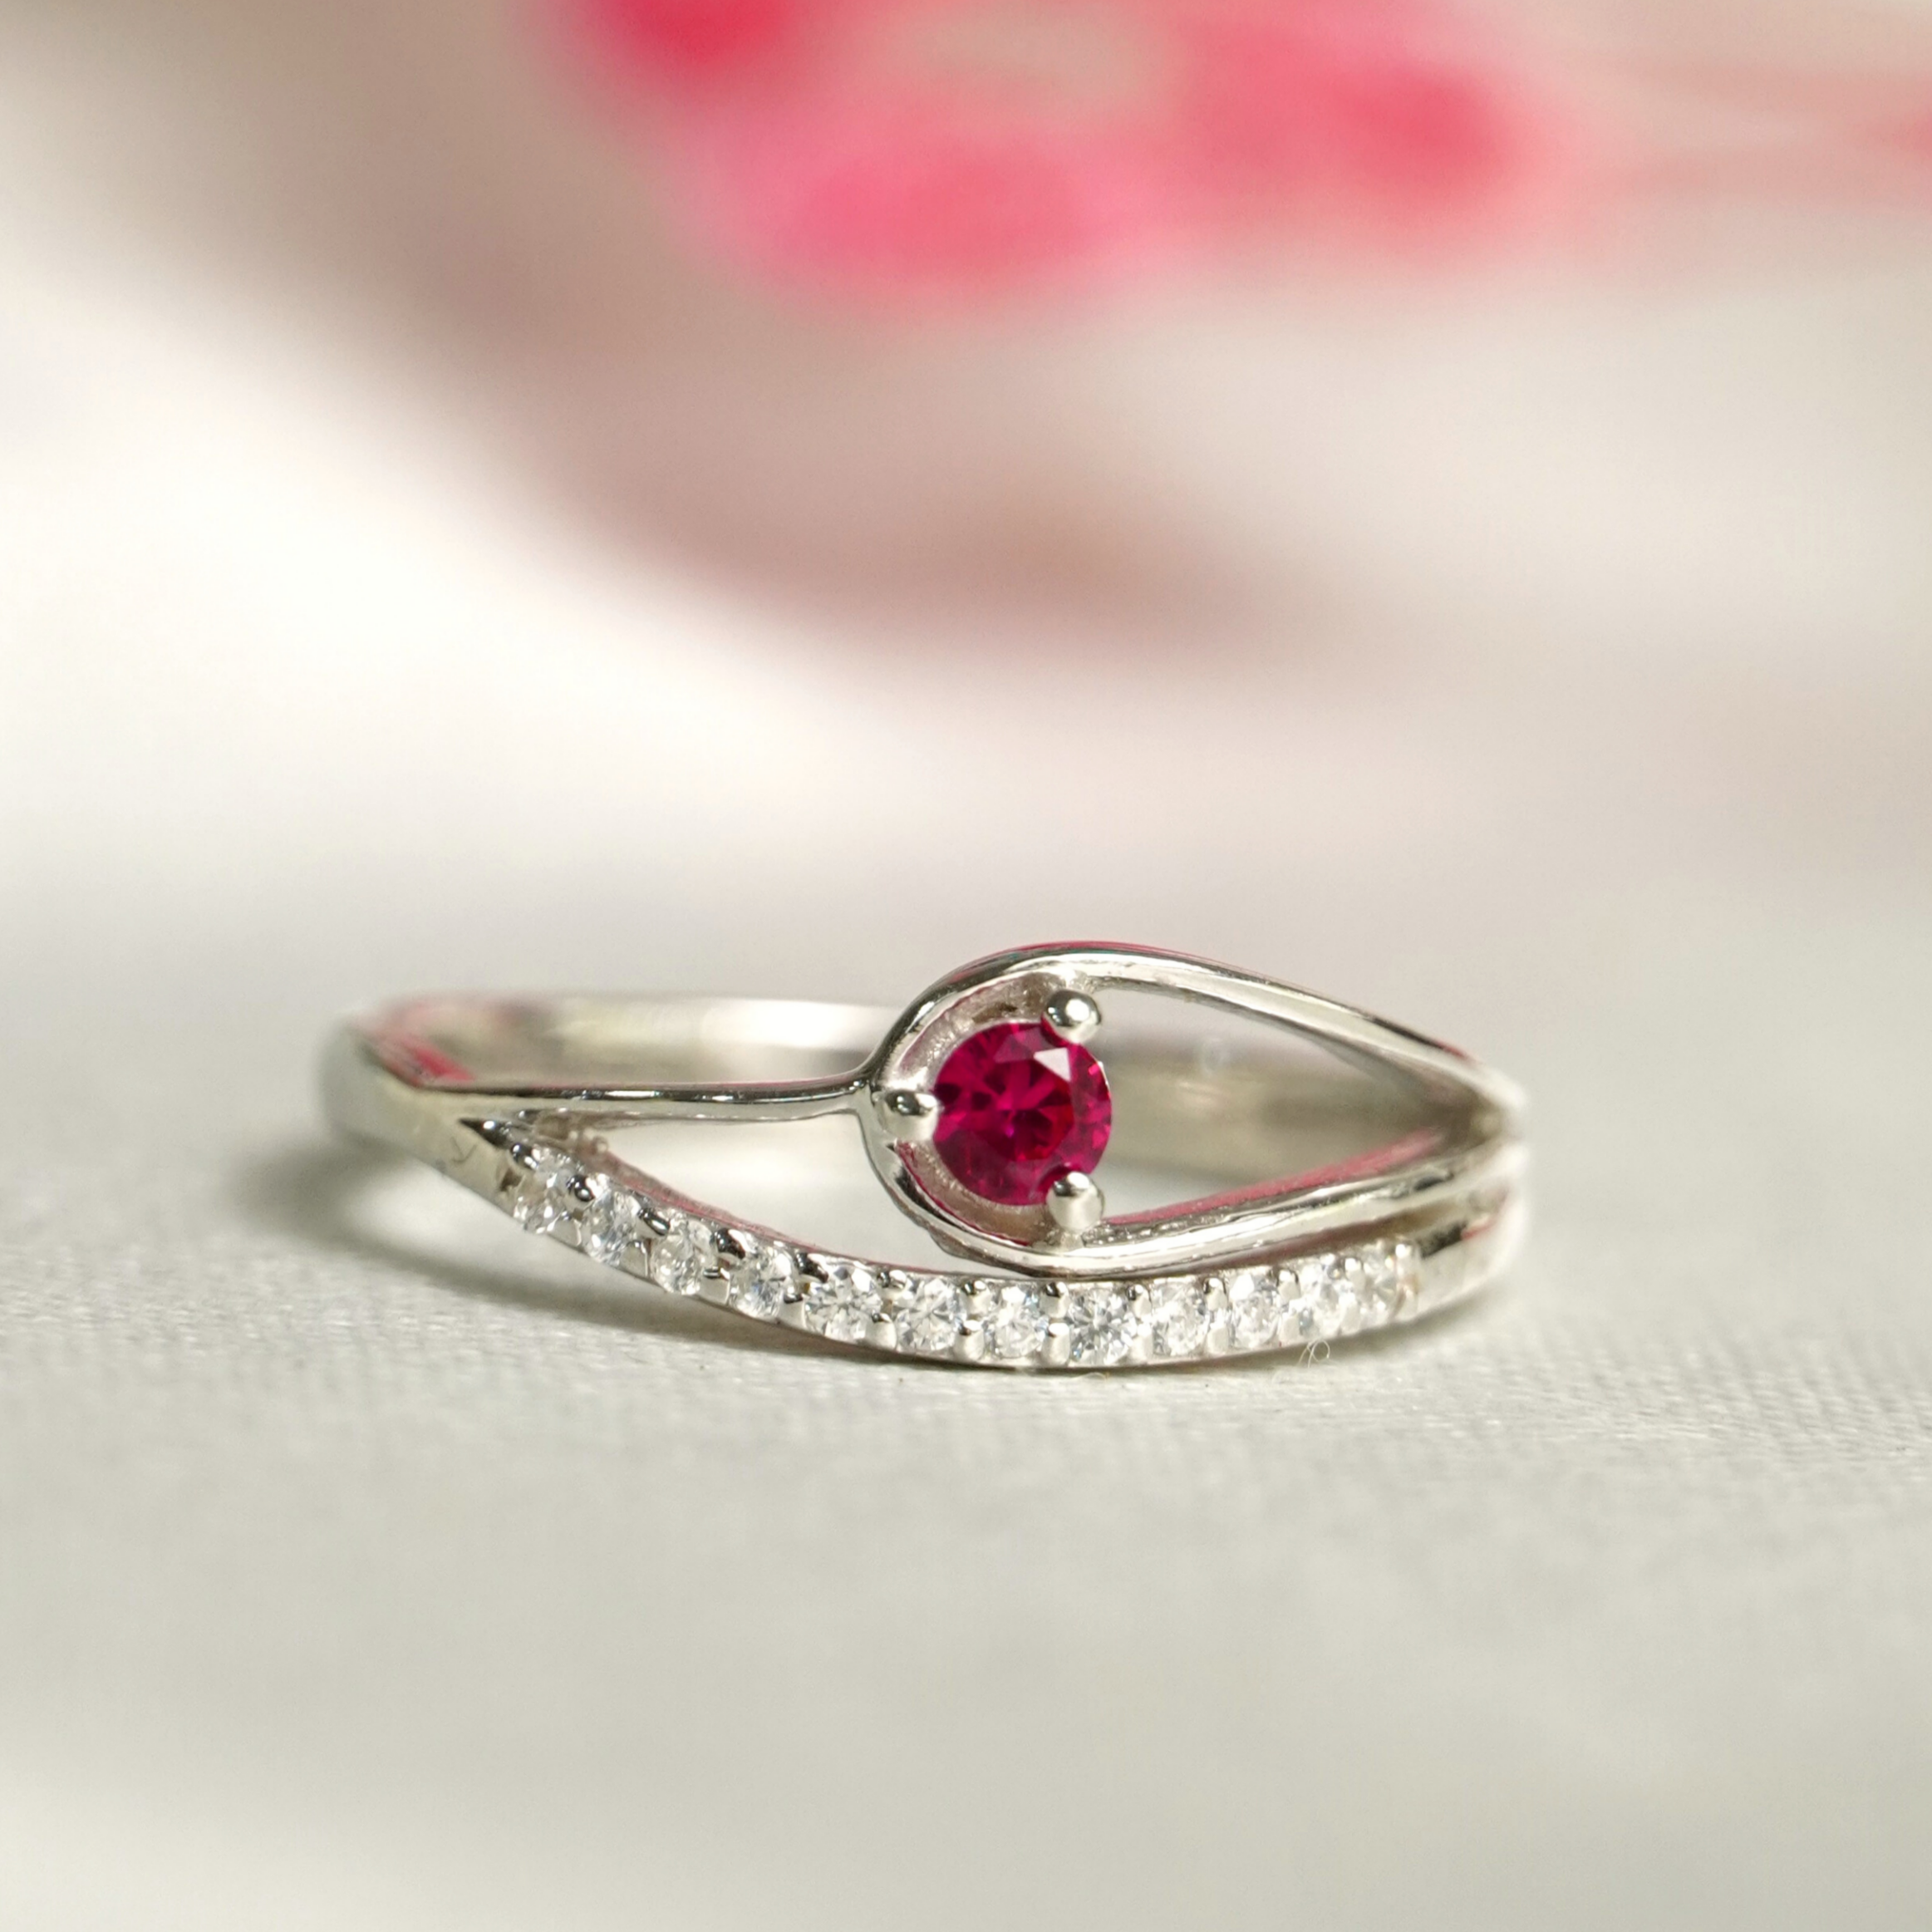 Red Ruby Stone Ring Women, Big Stone Baguette Ring Ladies, Handmade Silver  Ring, 925 Sterling Silver, Authentic Silver Ring, Gift for Her - Etsy | Silver  rings handmade, Silver ring designs, Women rings